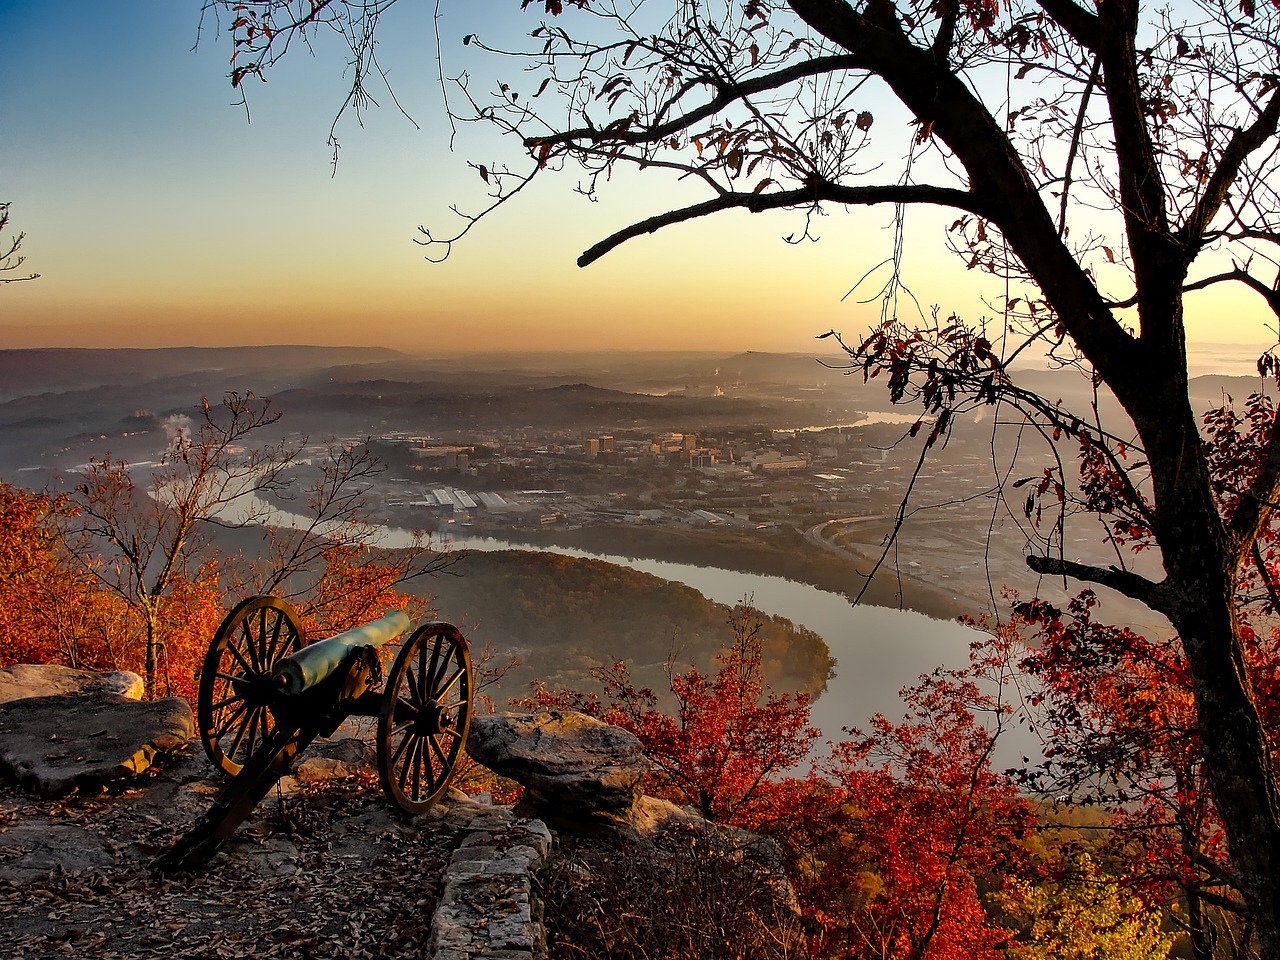 Chattanooga Ghosts and Gastronomy: A 4-Day Road Trip